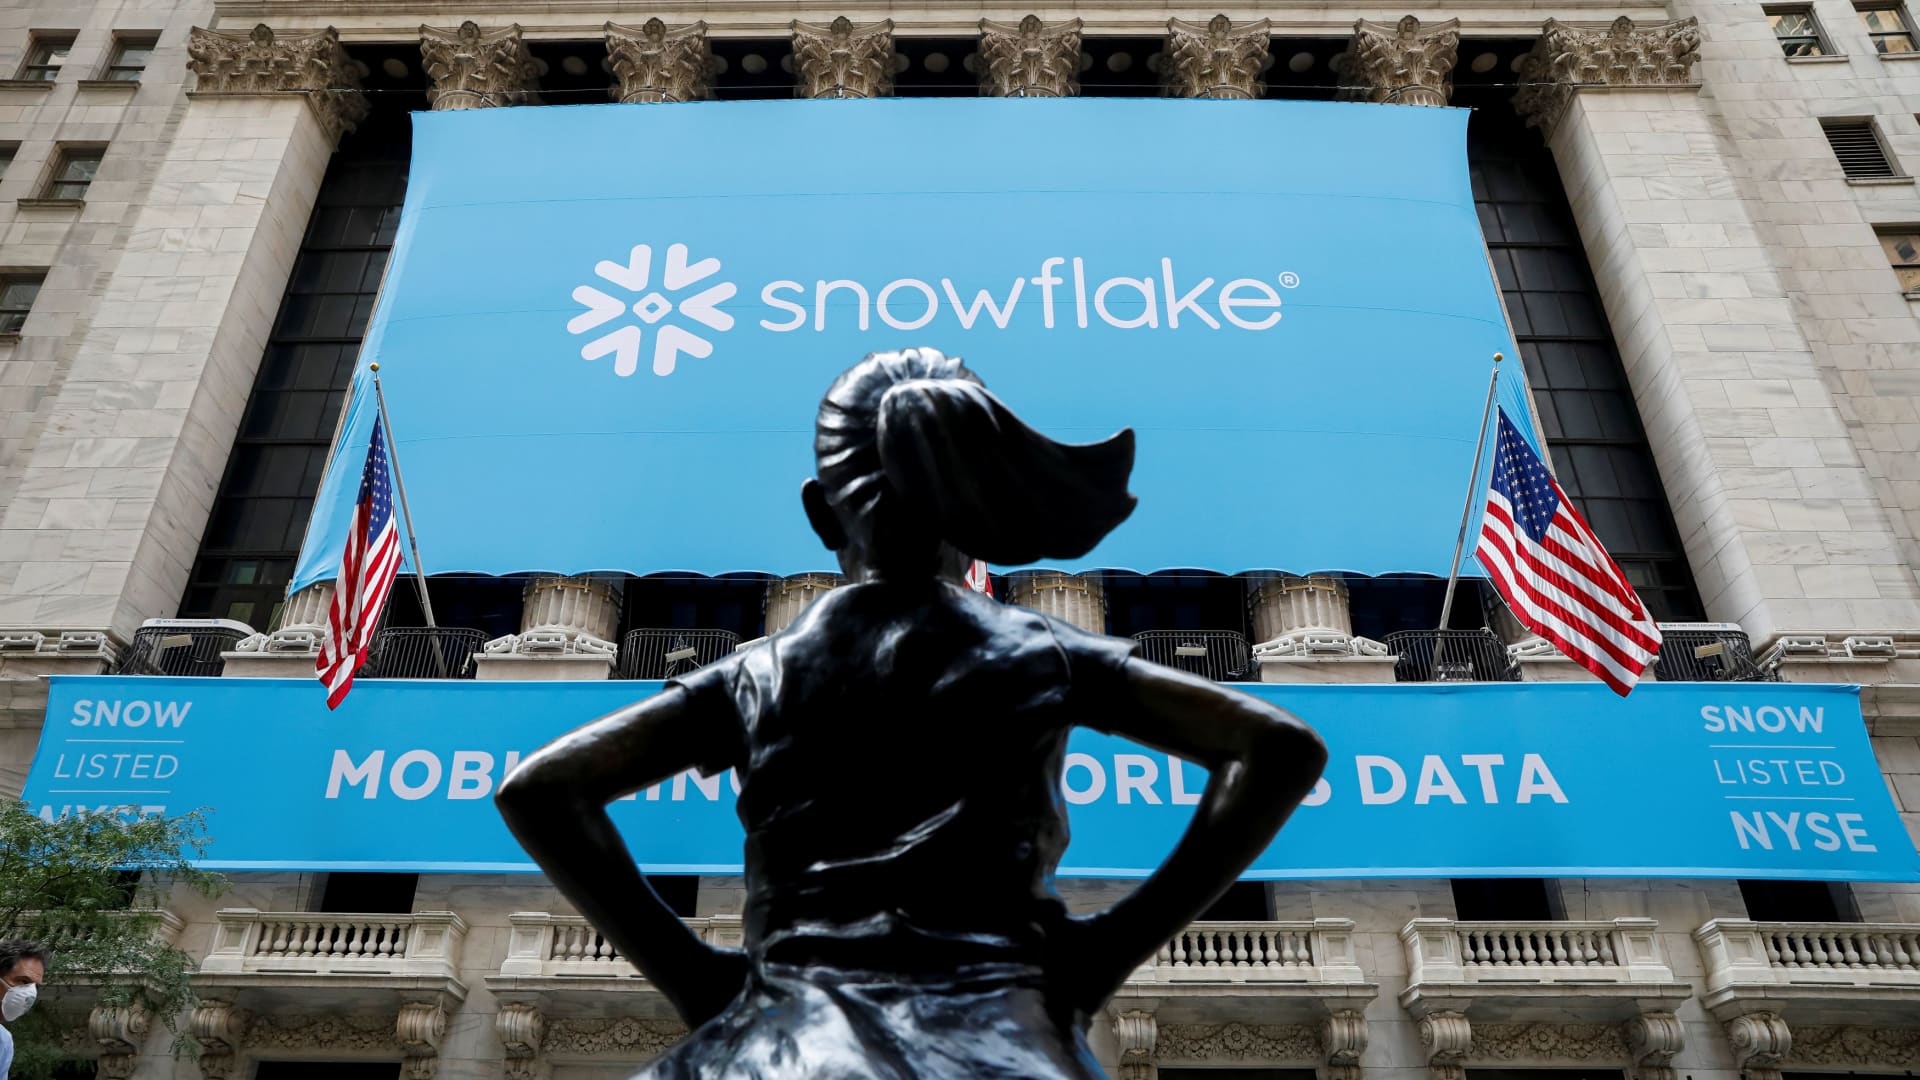 A banner for Snowflake Inc. is displayed celebrating the company's IPO at the New York Stock Exchange (NYSE) in New York, U.S., September 16, 2020.